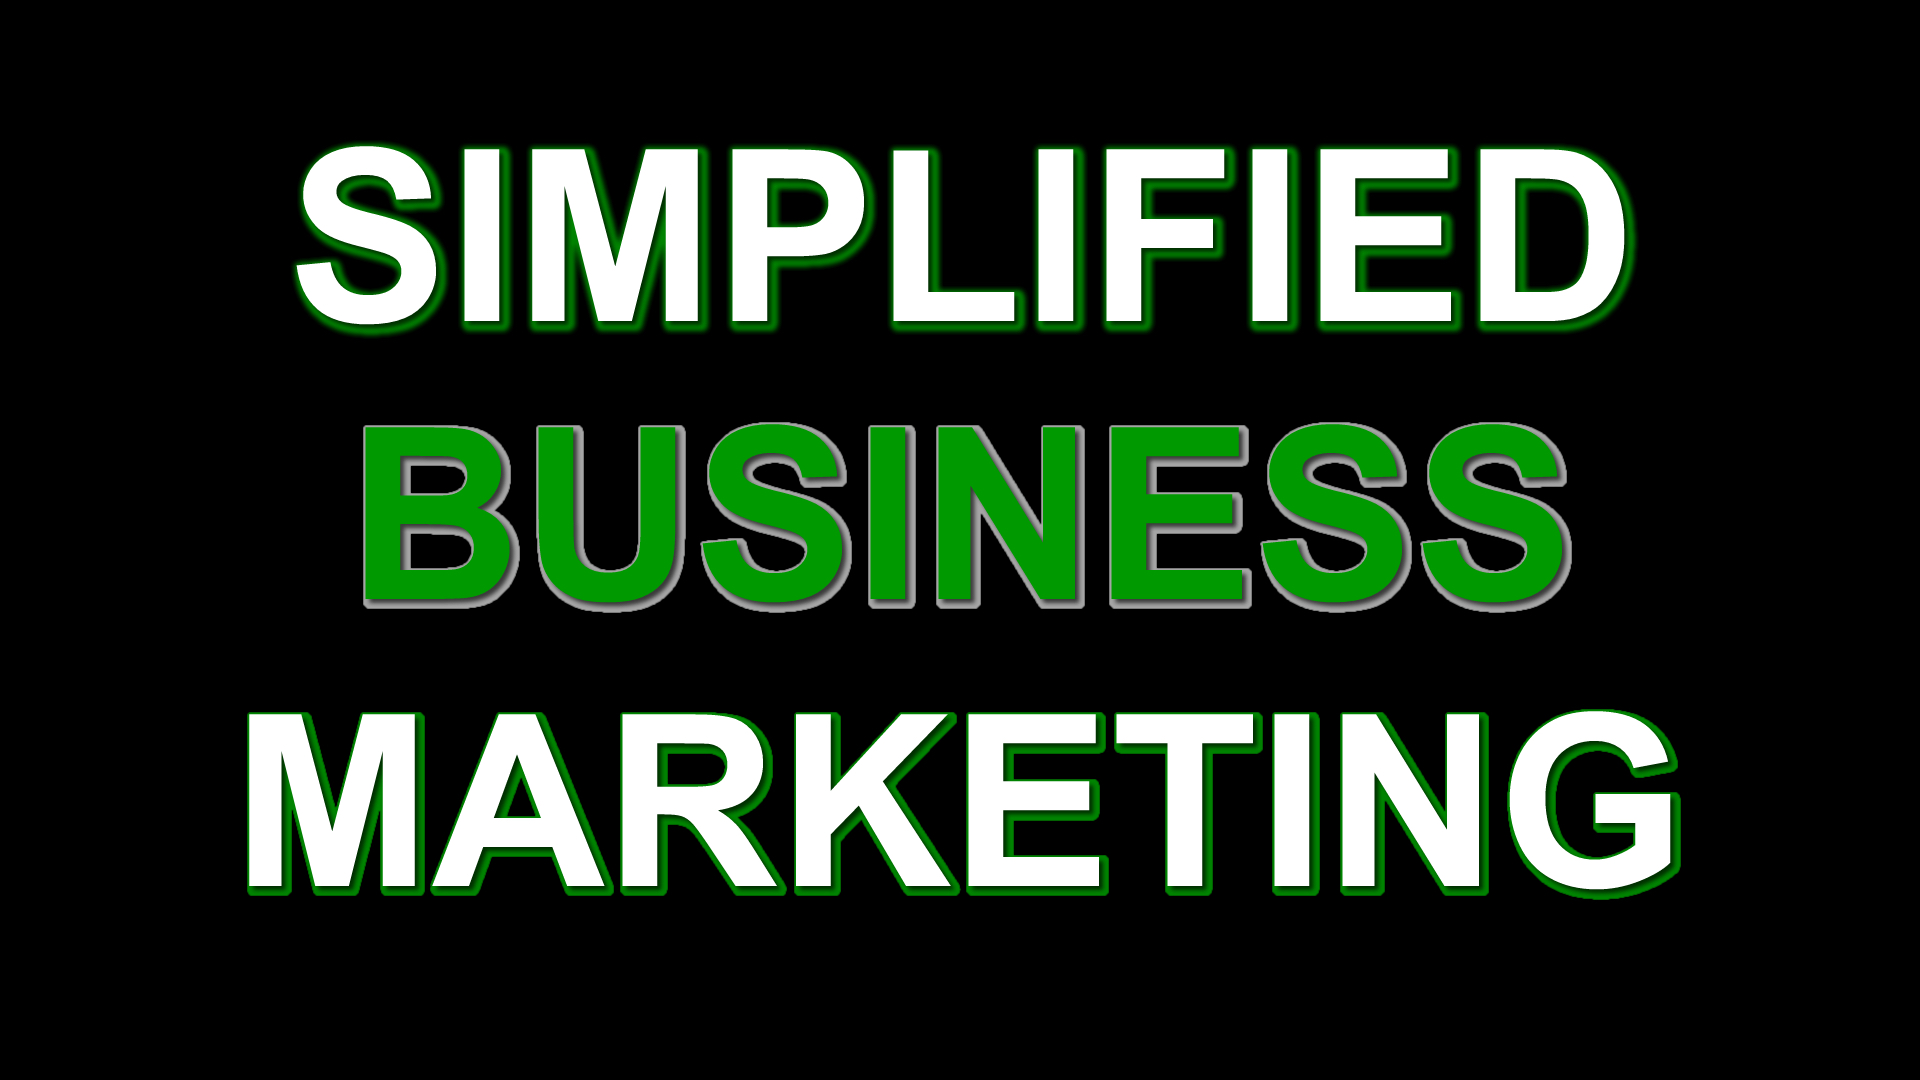 Simplfied Business Marketing